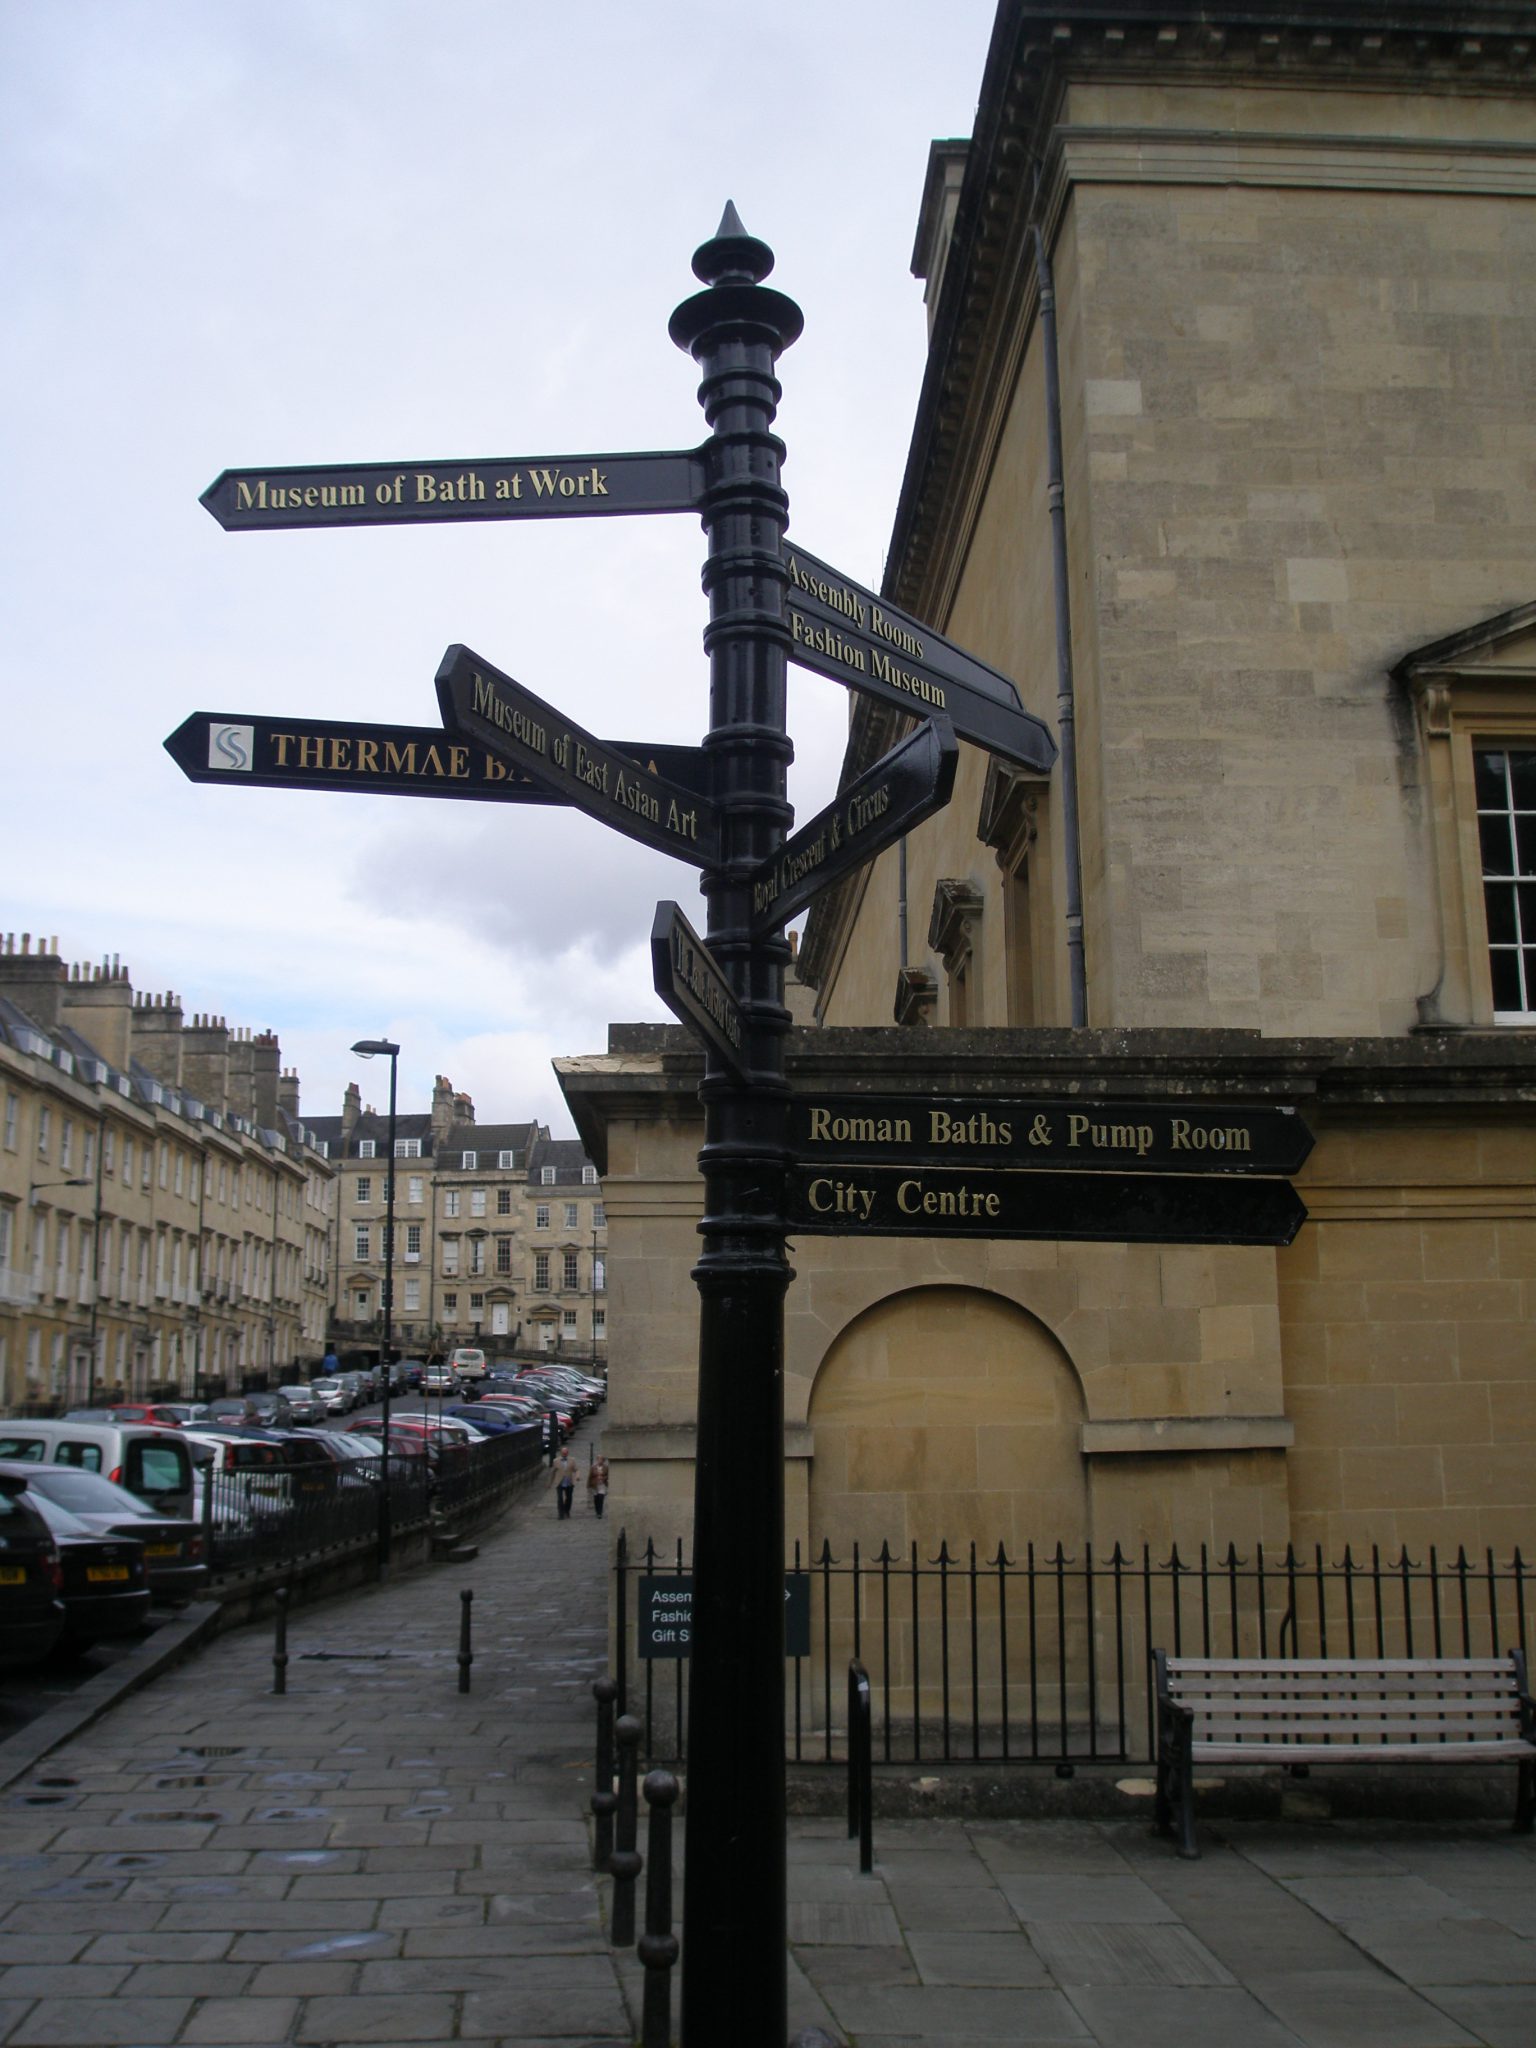 It's impossible to get lost in Bath